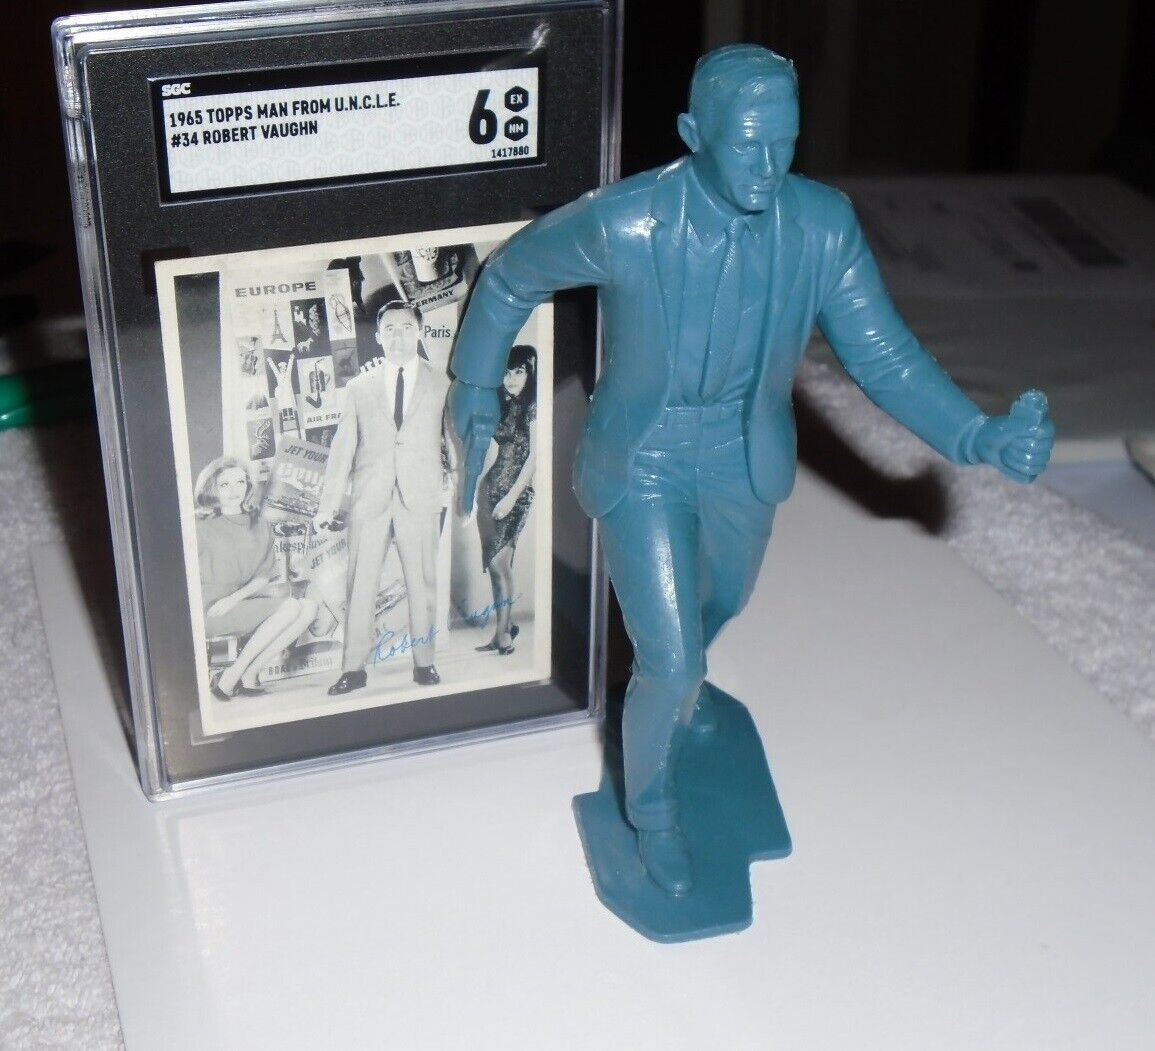 1965 Topps Man From Uncle #34 SGC 6 EX NM & 1966 U.N.C.L.E. Napoleon Solo Figure